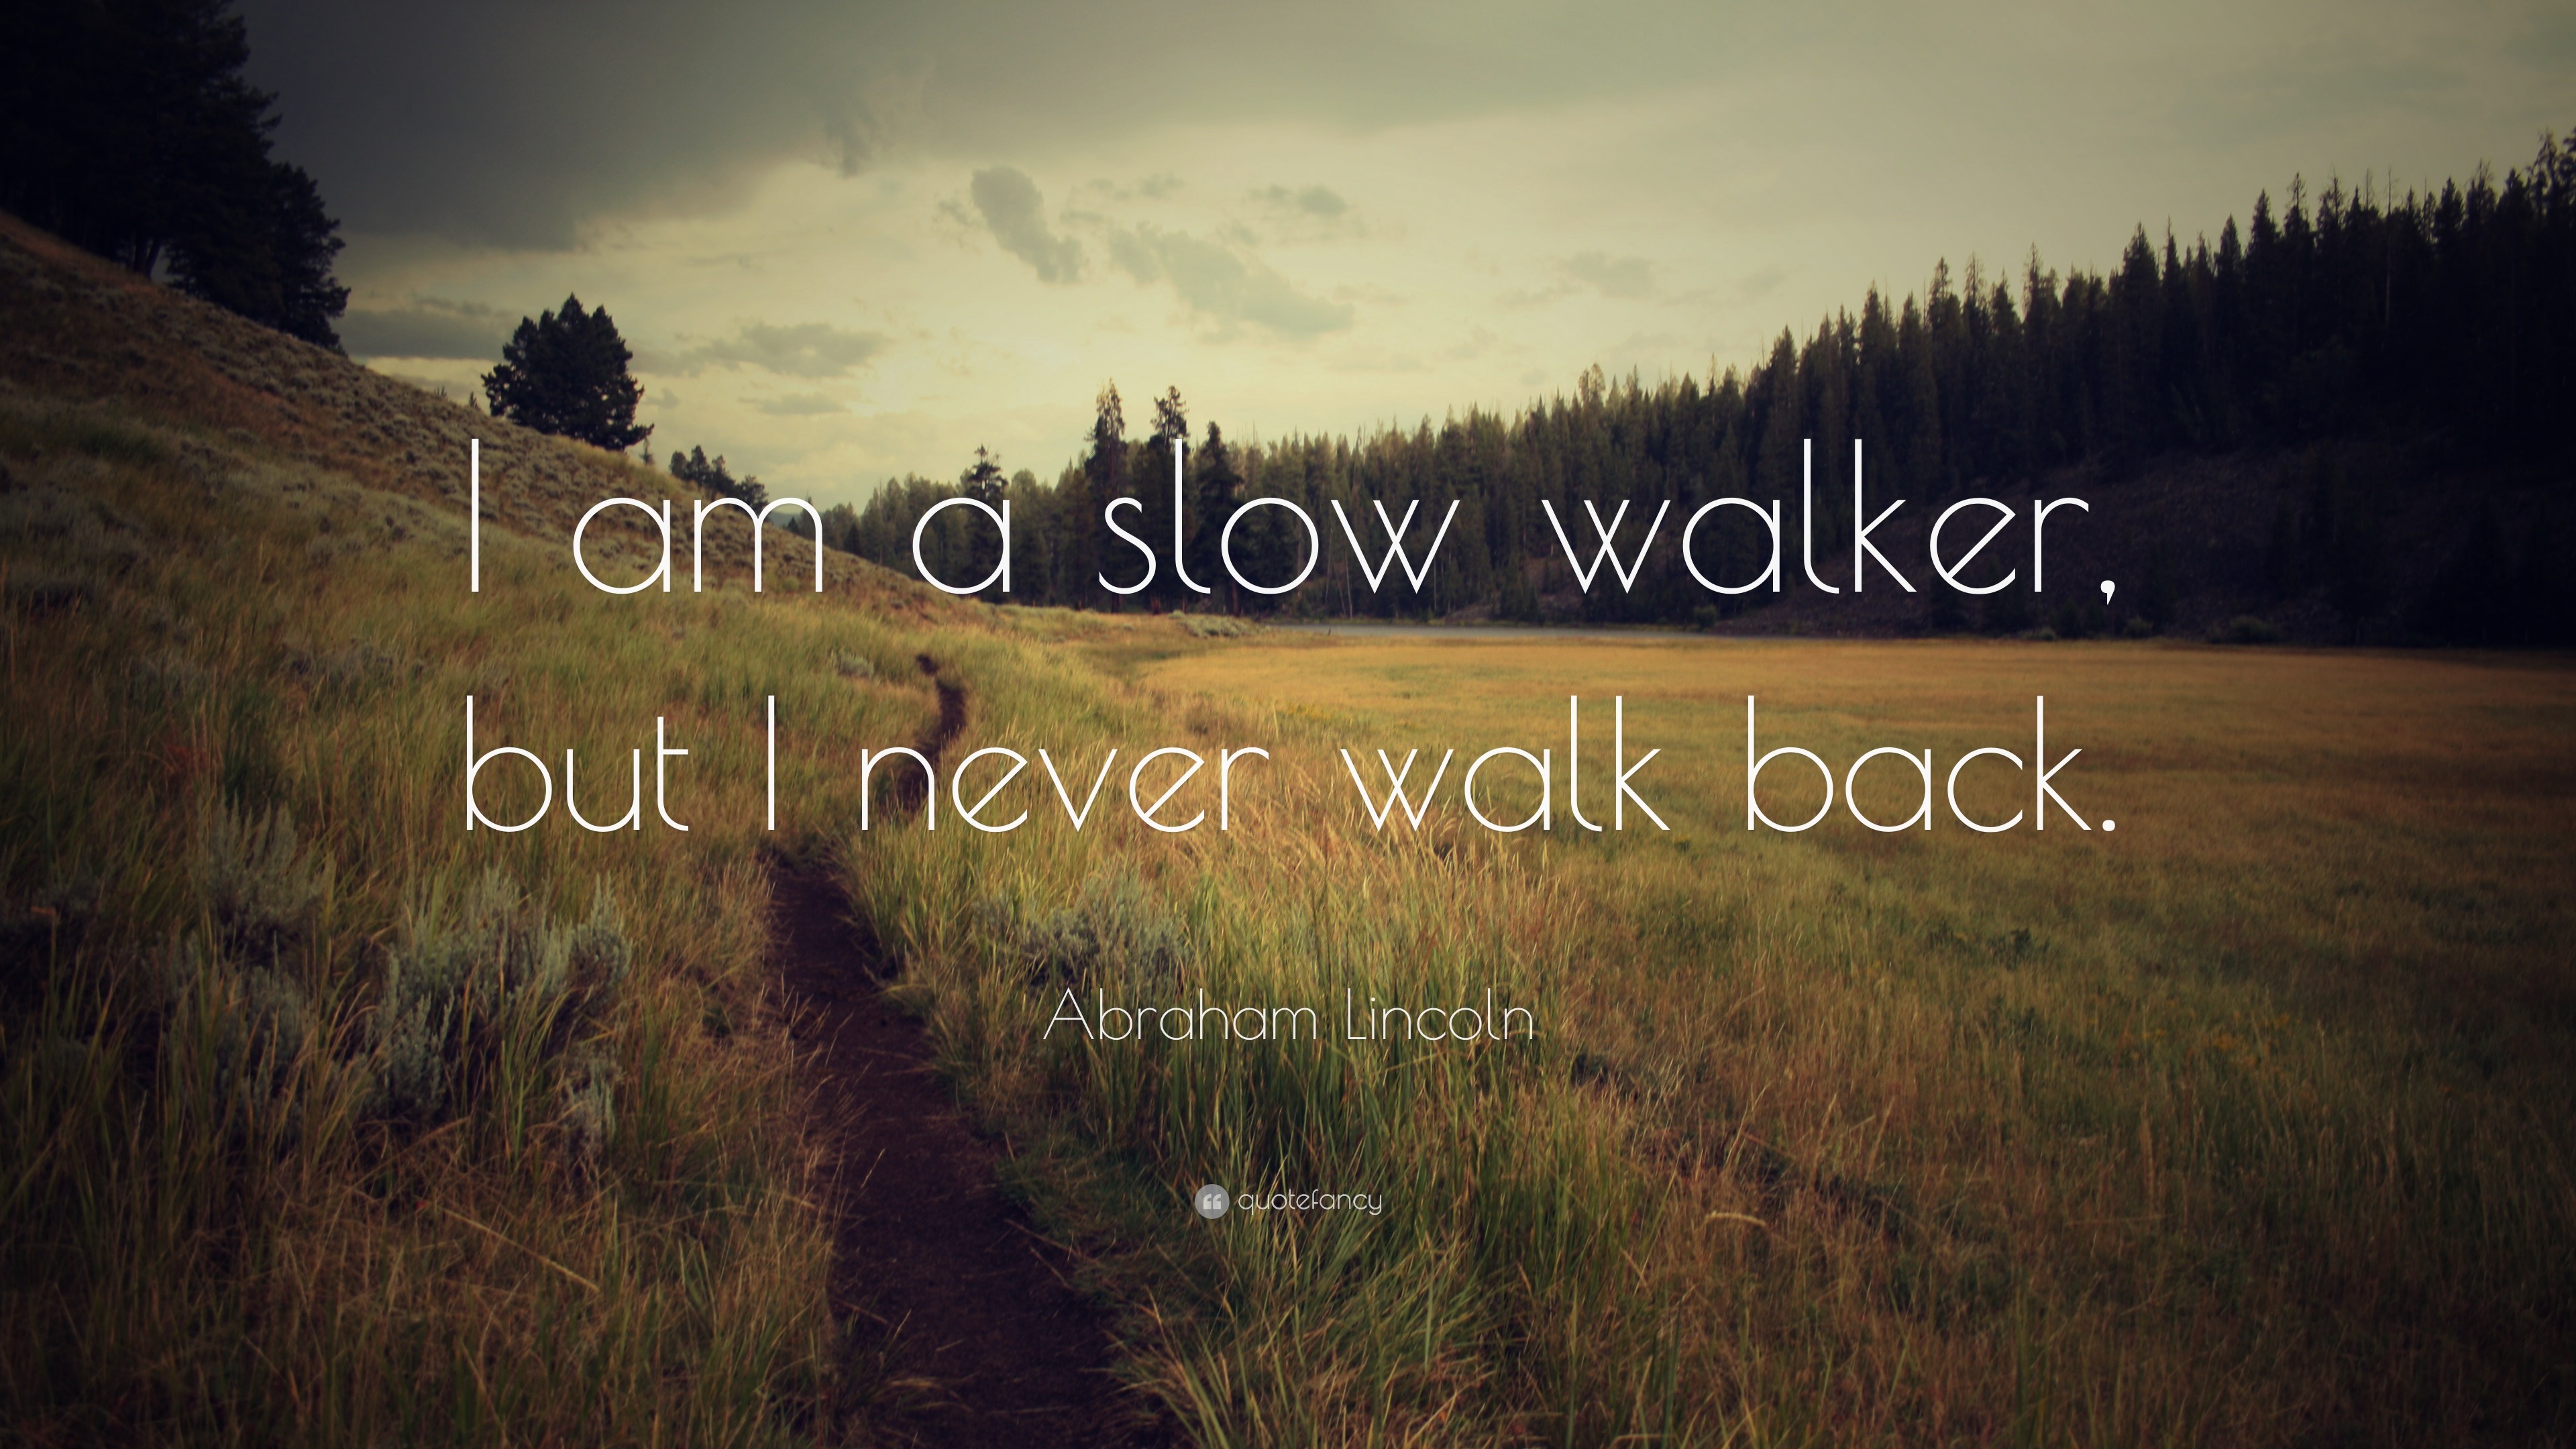 3840x2160 Abraham Lincoln Quote: “I am a slow walker, but I never walk back